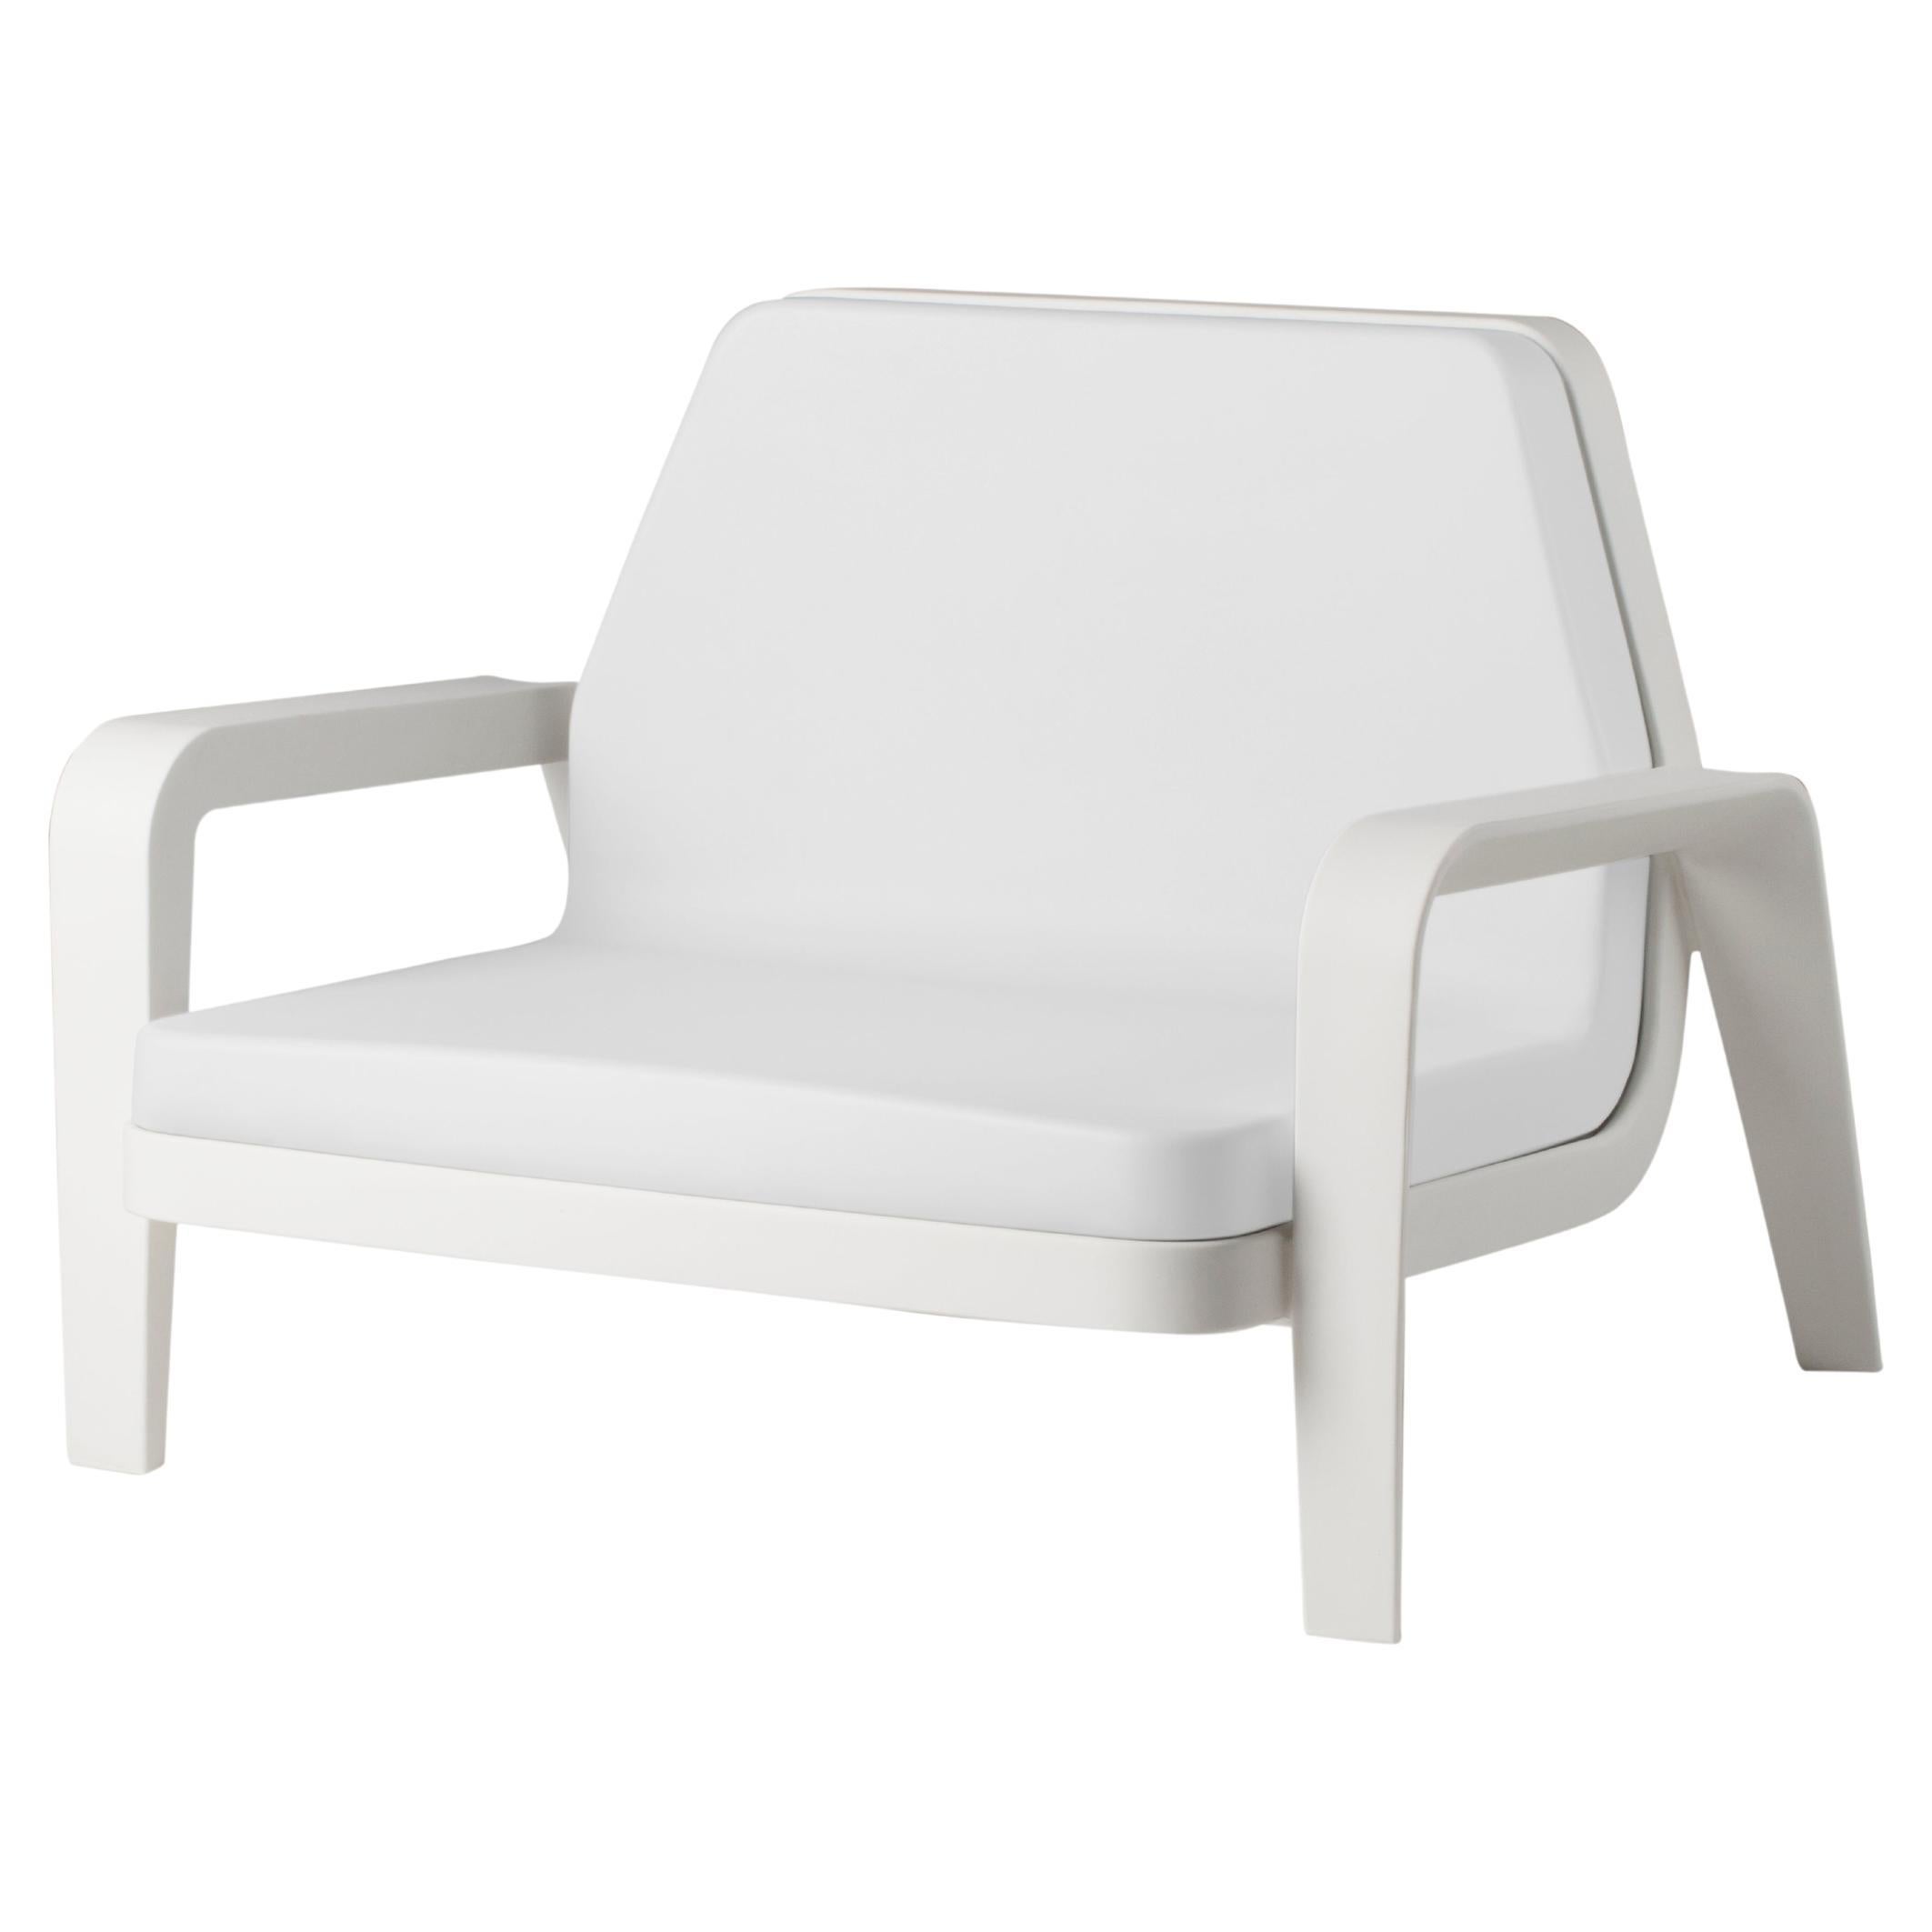 Slide Design America Armchair in Soft White Fabric with Milky White Frame For Sale